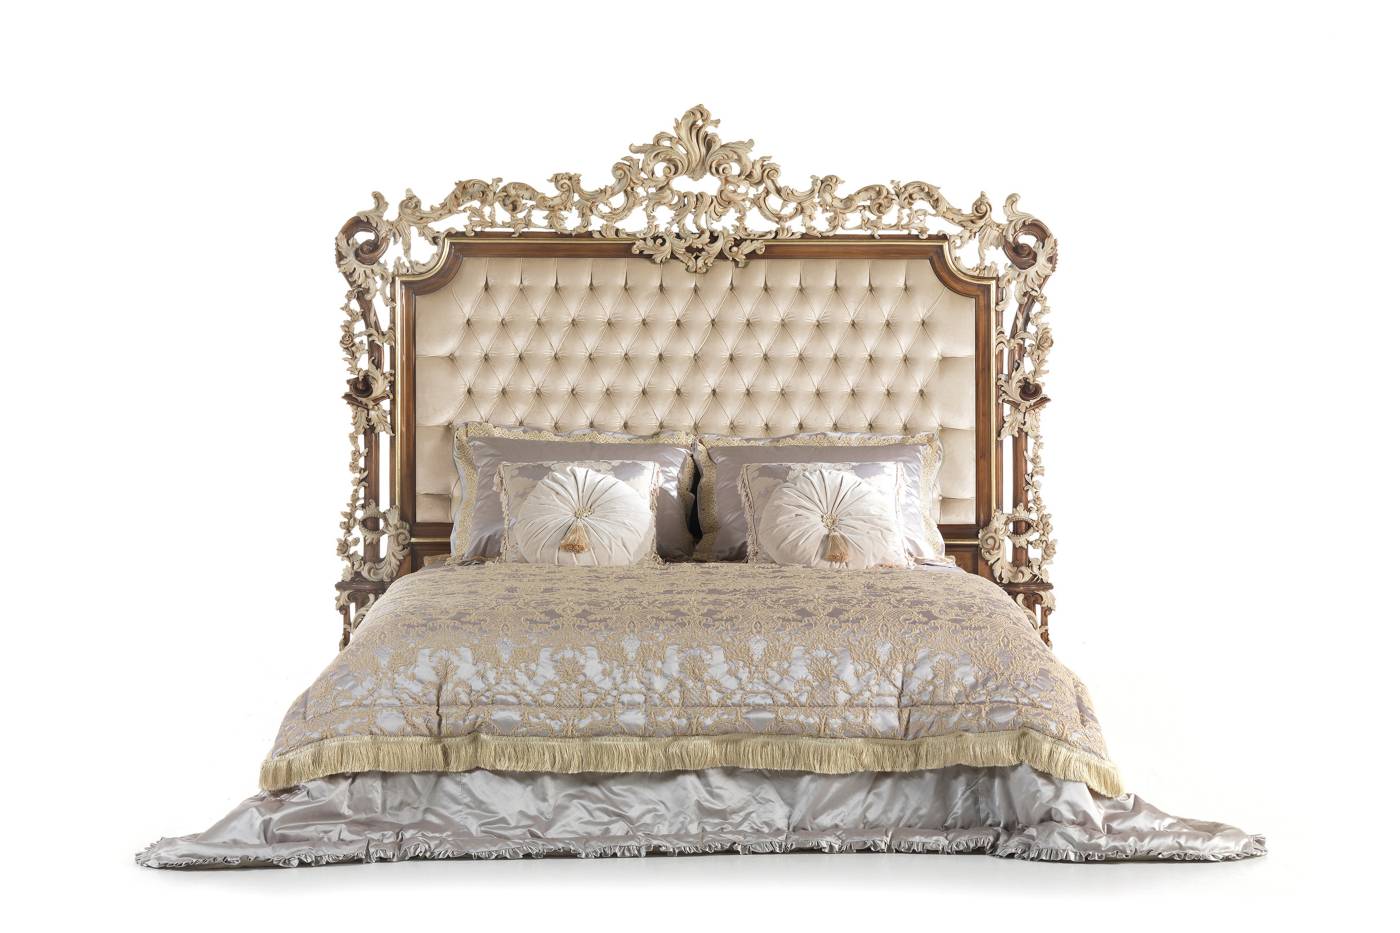 LA GRANDE DAME bed - Bespoke projects with luxury Made in Italy classic furniture